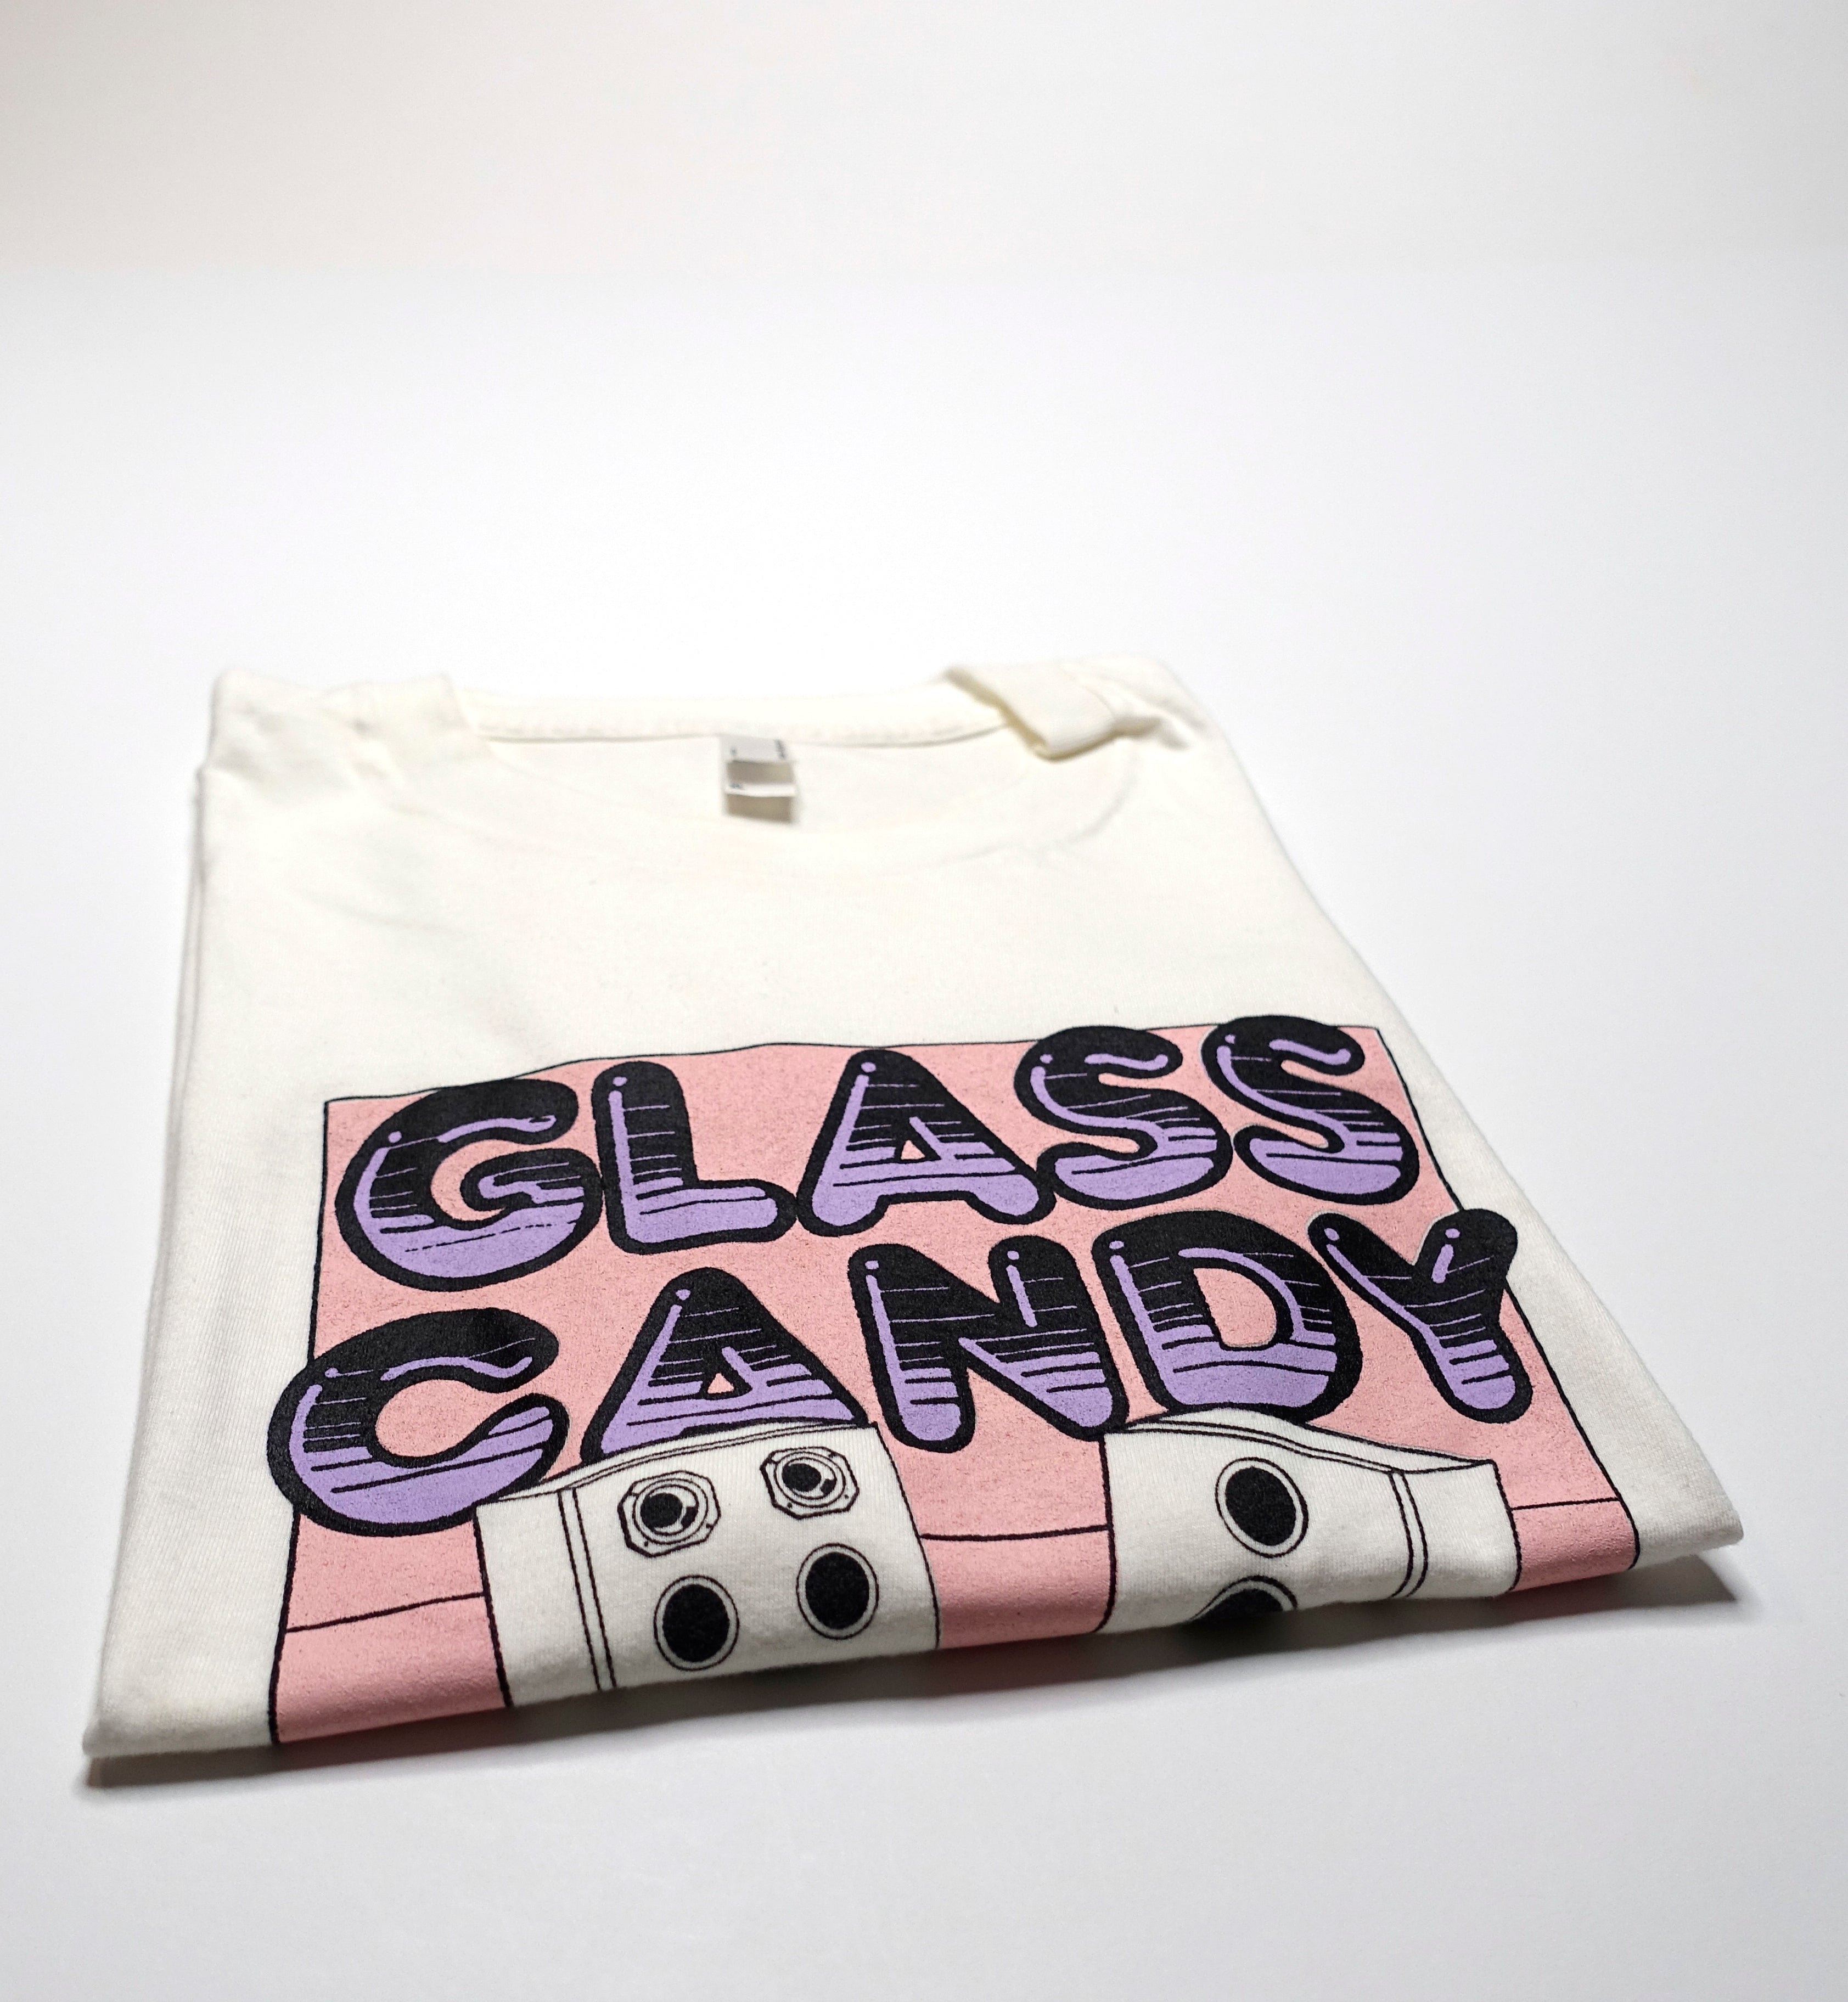 Glass Candy ‎– Pain Relief Is Fun / After Dark 2 2013 Tour Shirt Size XL / Large